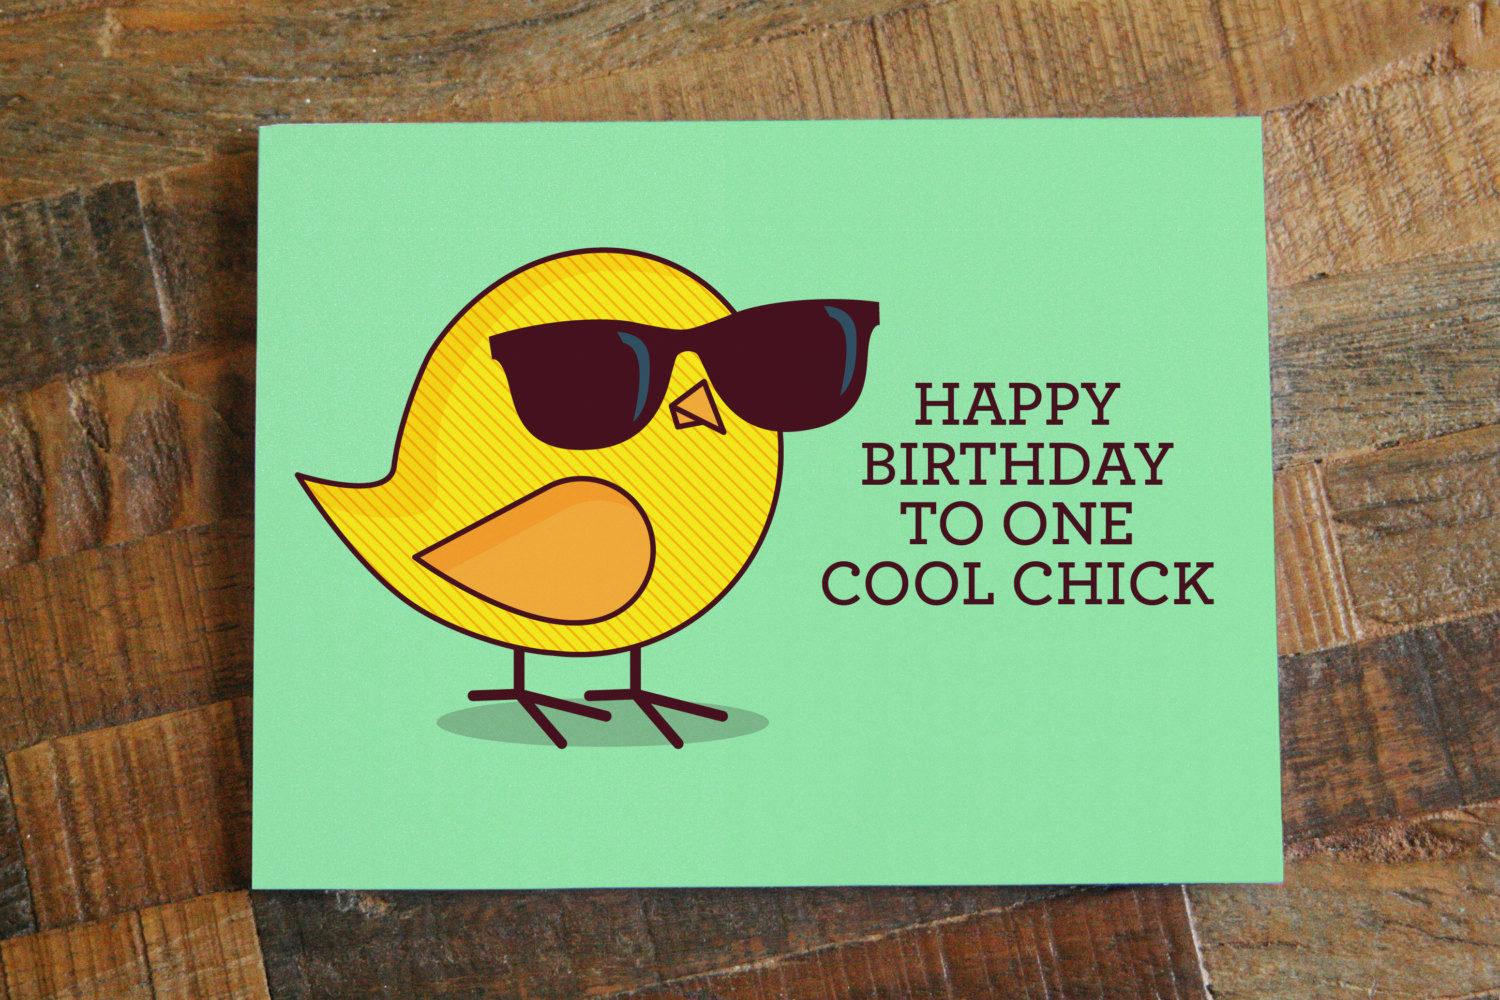 Funny Birthday Cards For Her
 Funny Birthday Card For Her "Happy Birthday to e Cool